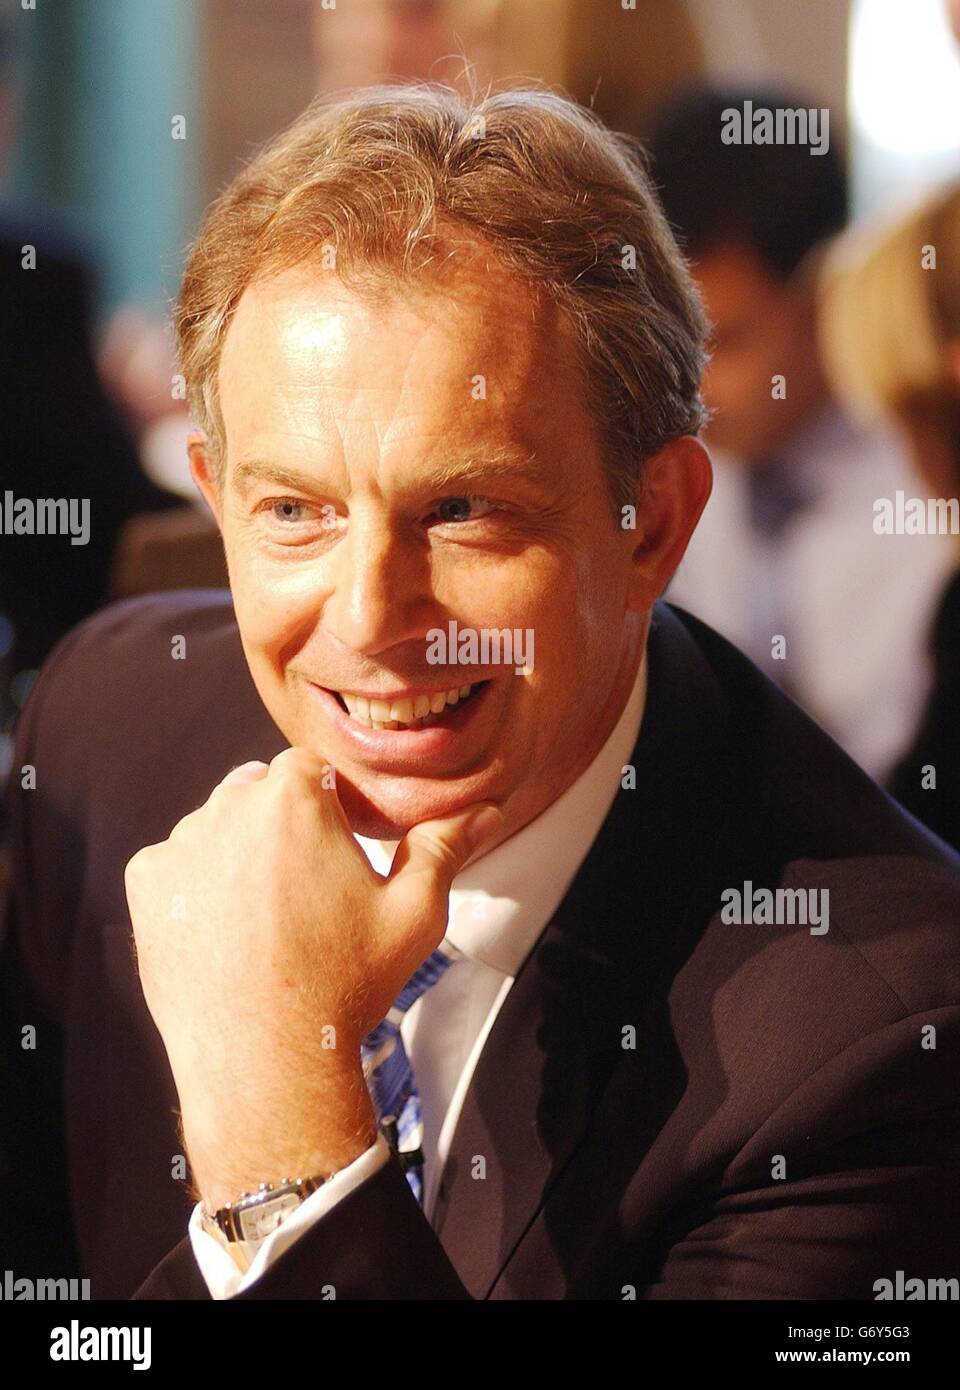 British Prime Minister Tony Blair in 'The Big Conversation' at Downing Street, London where he conversed with a selection of people across the community. Stock Photo